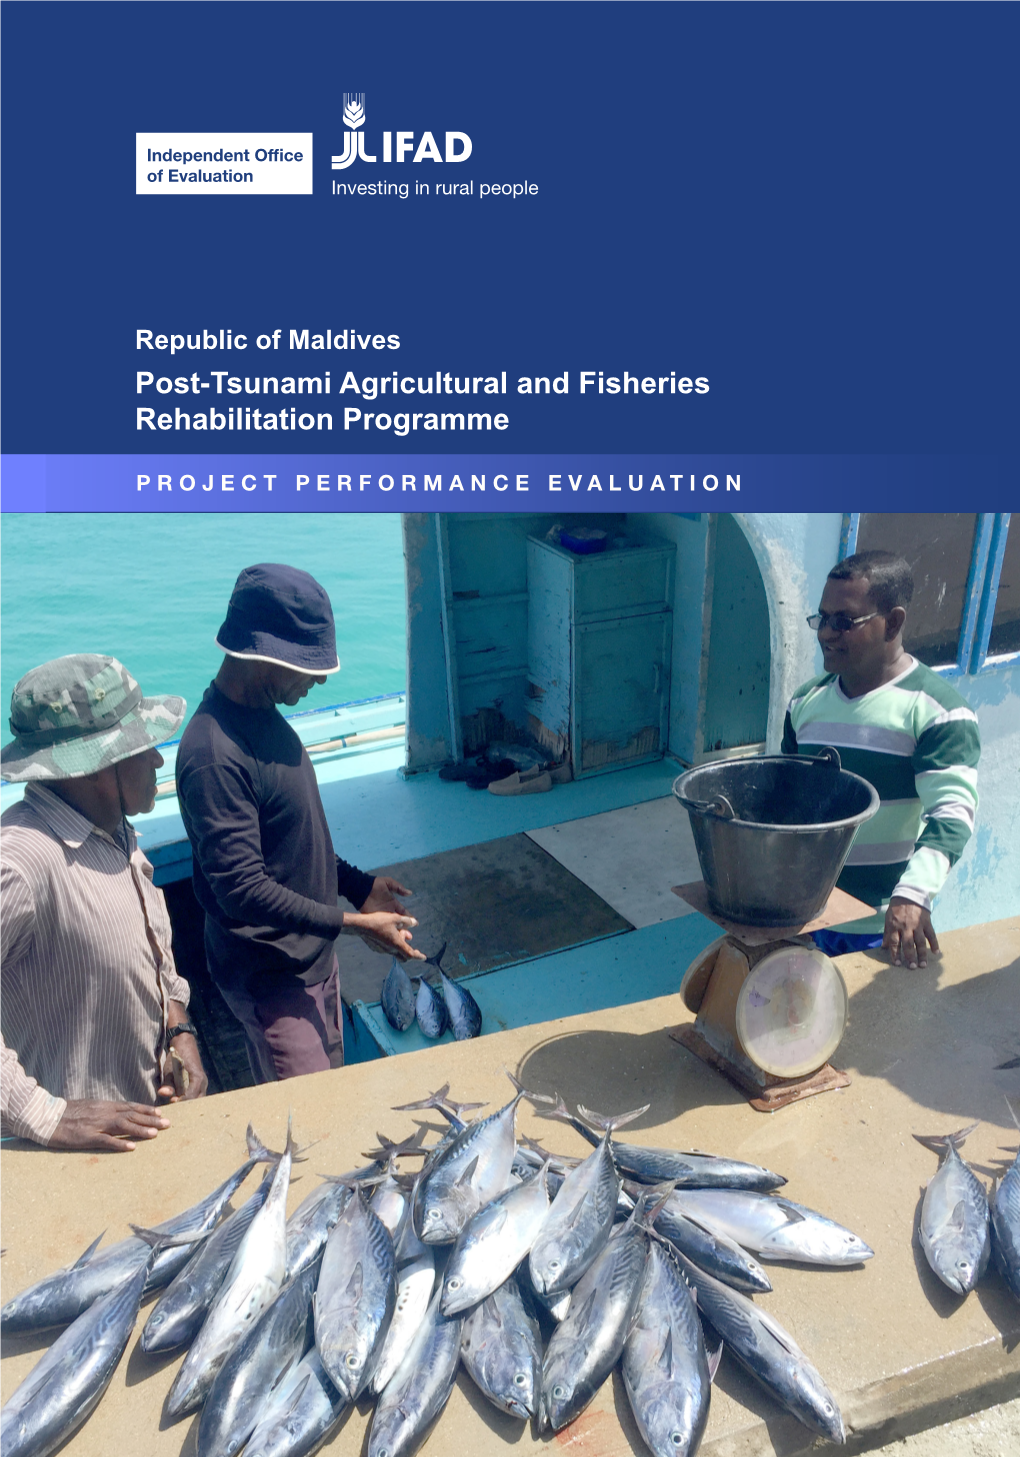 Post-Tsunami Agricultural and Fisheries Rehabilitation Programme Project Performance Evaluation